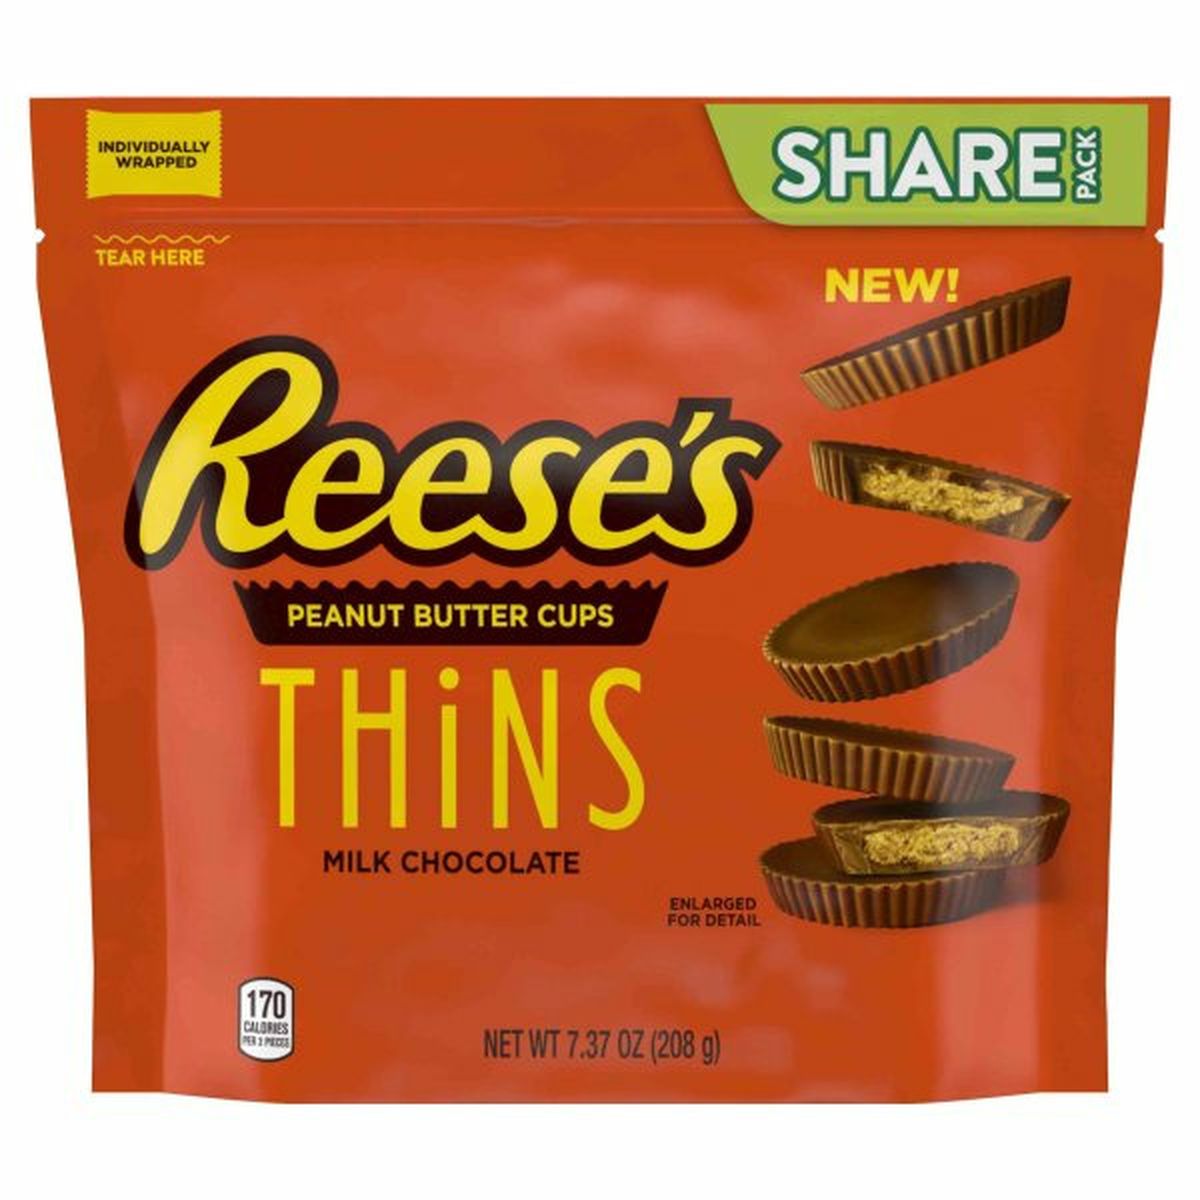 Calories in Reese's Peanut Butter Candy, Milk Chocolate, Peanut Butter, Thins